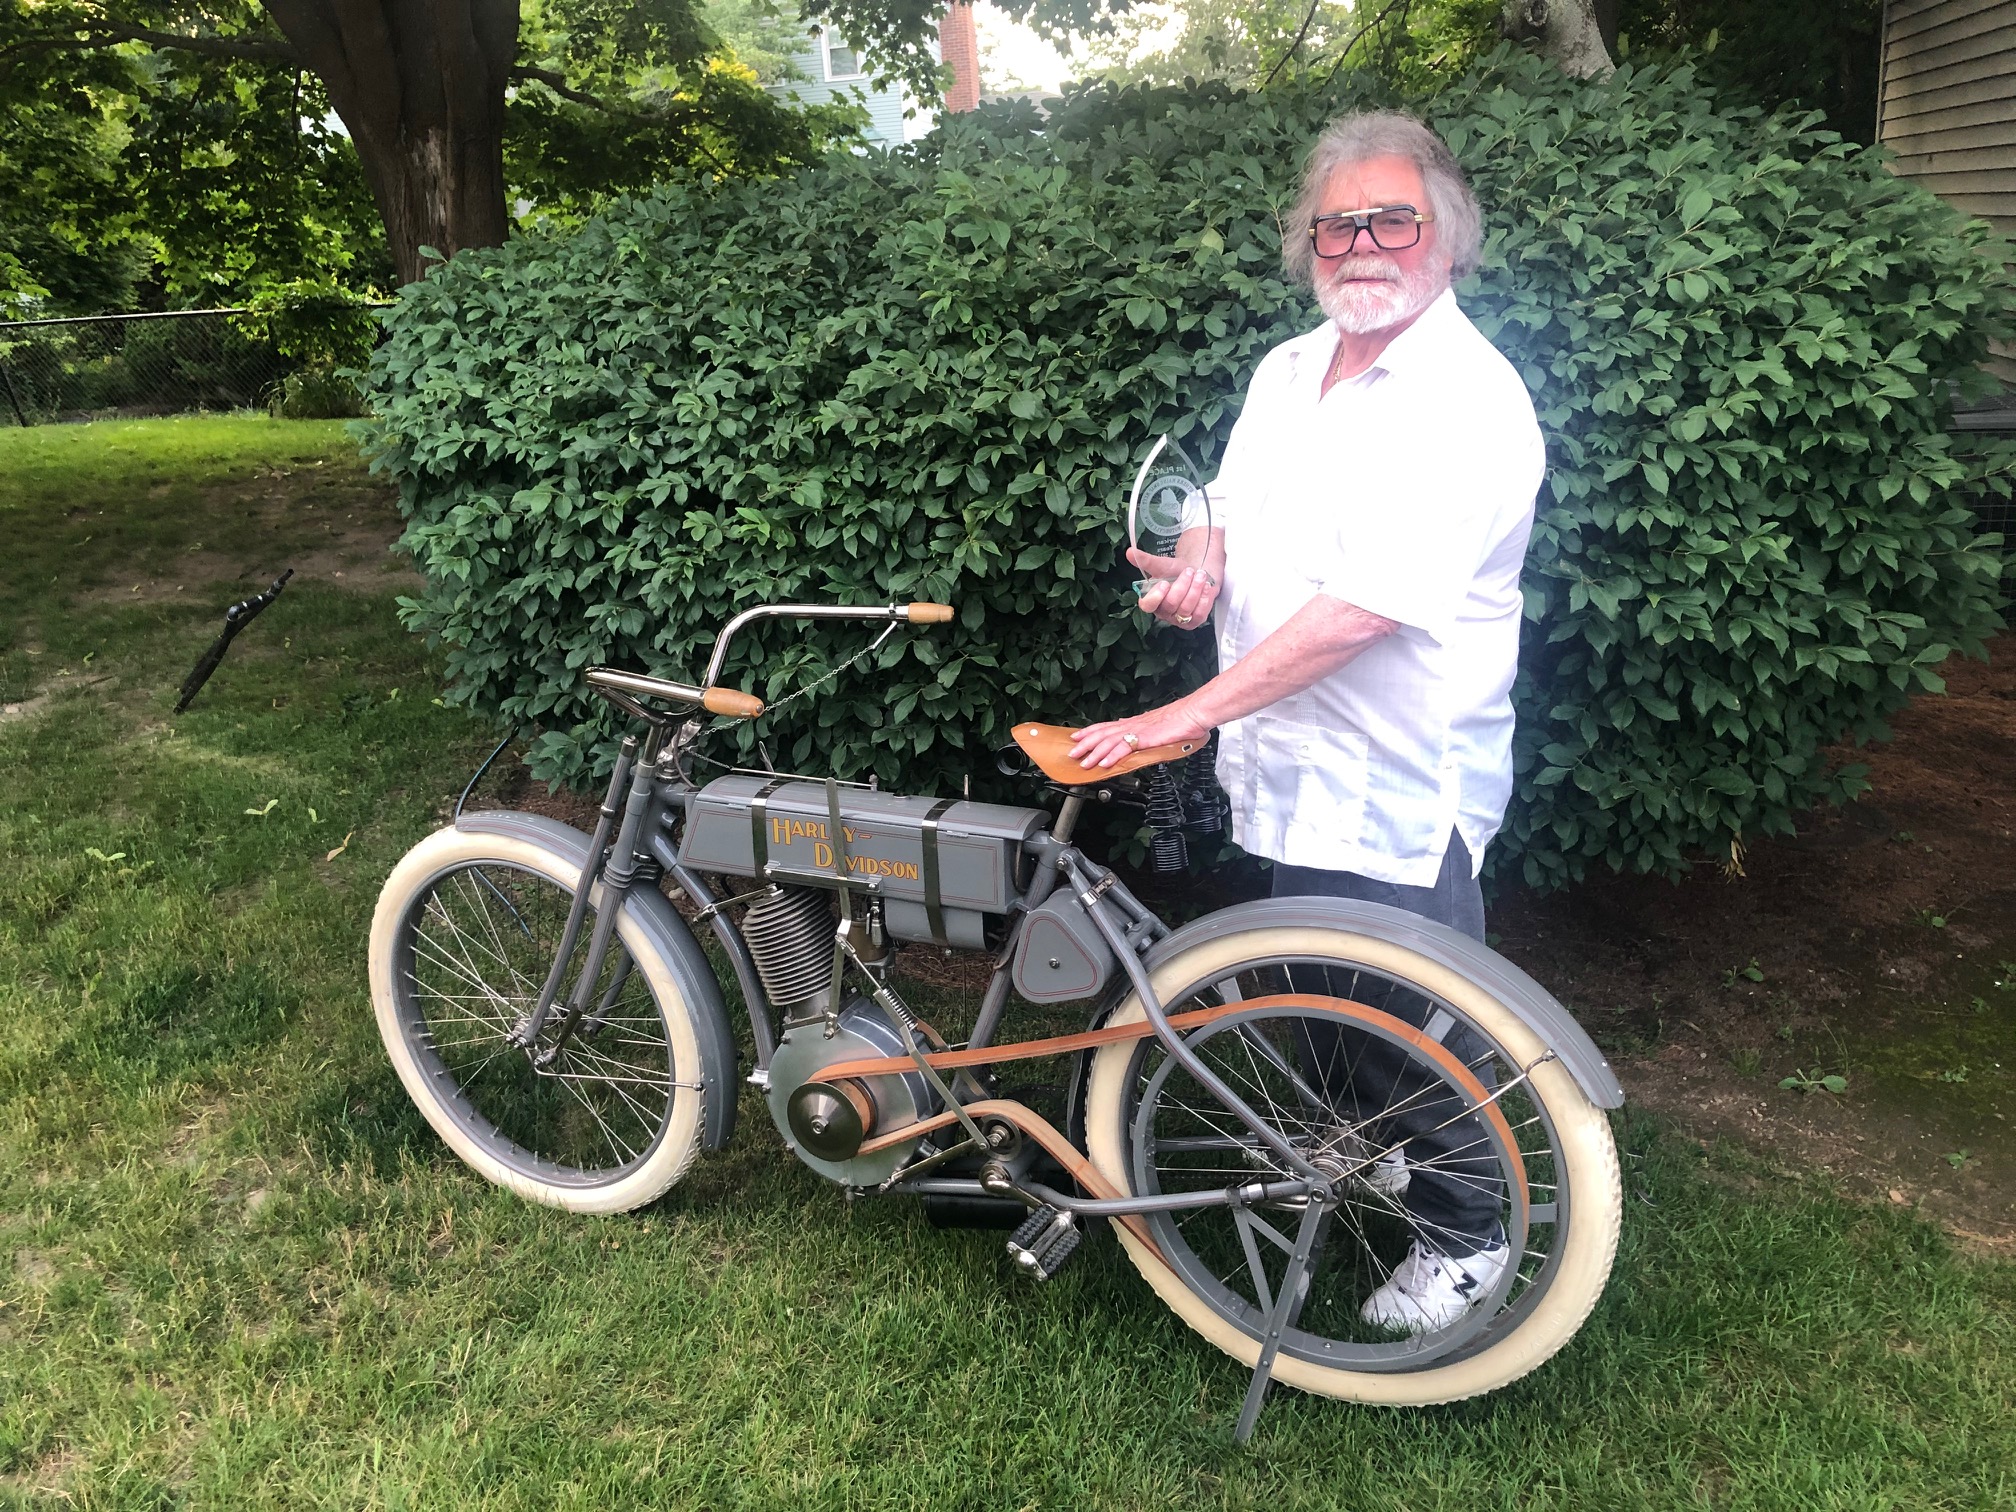 Dick Shappy and his 1908 Harley Davidson "Strap Tank"